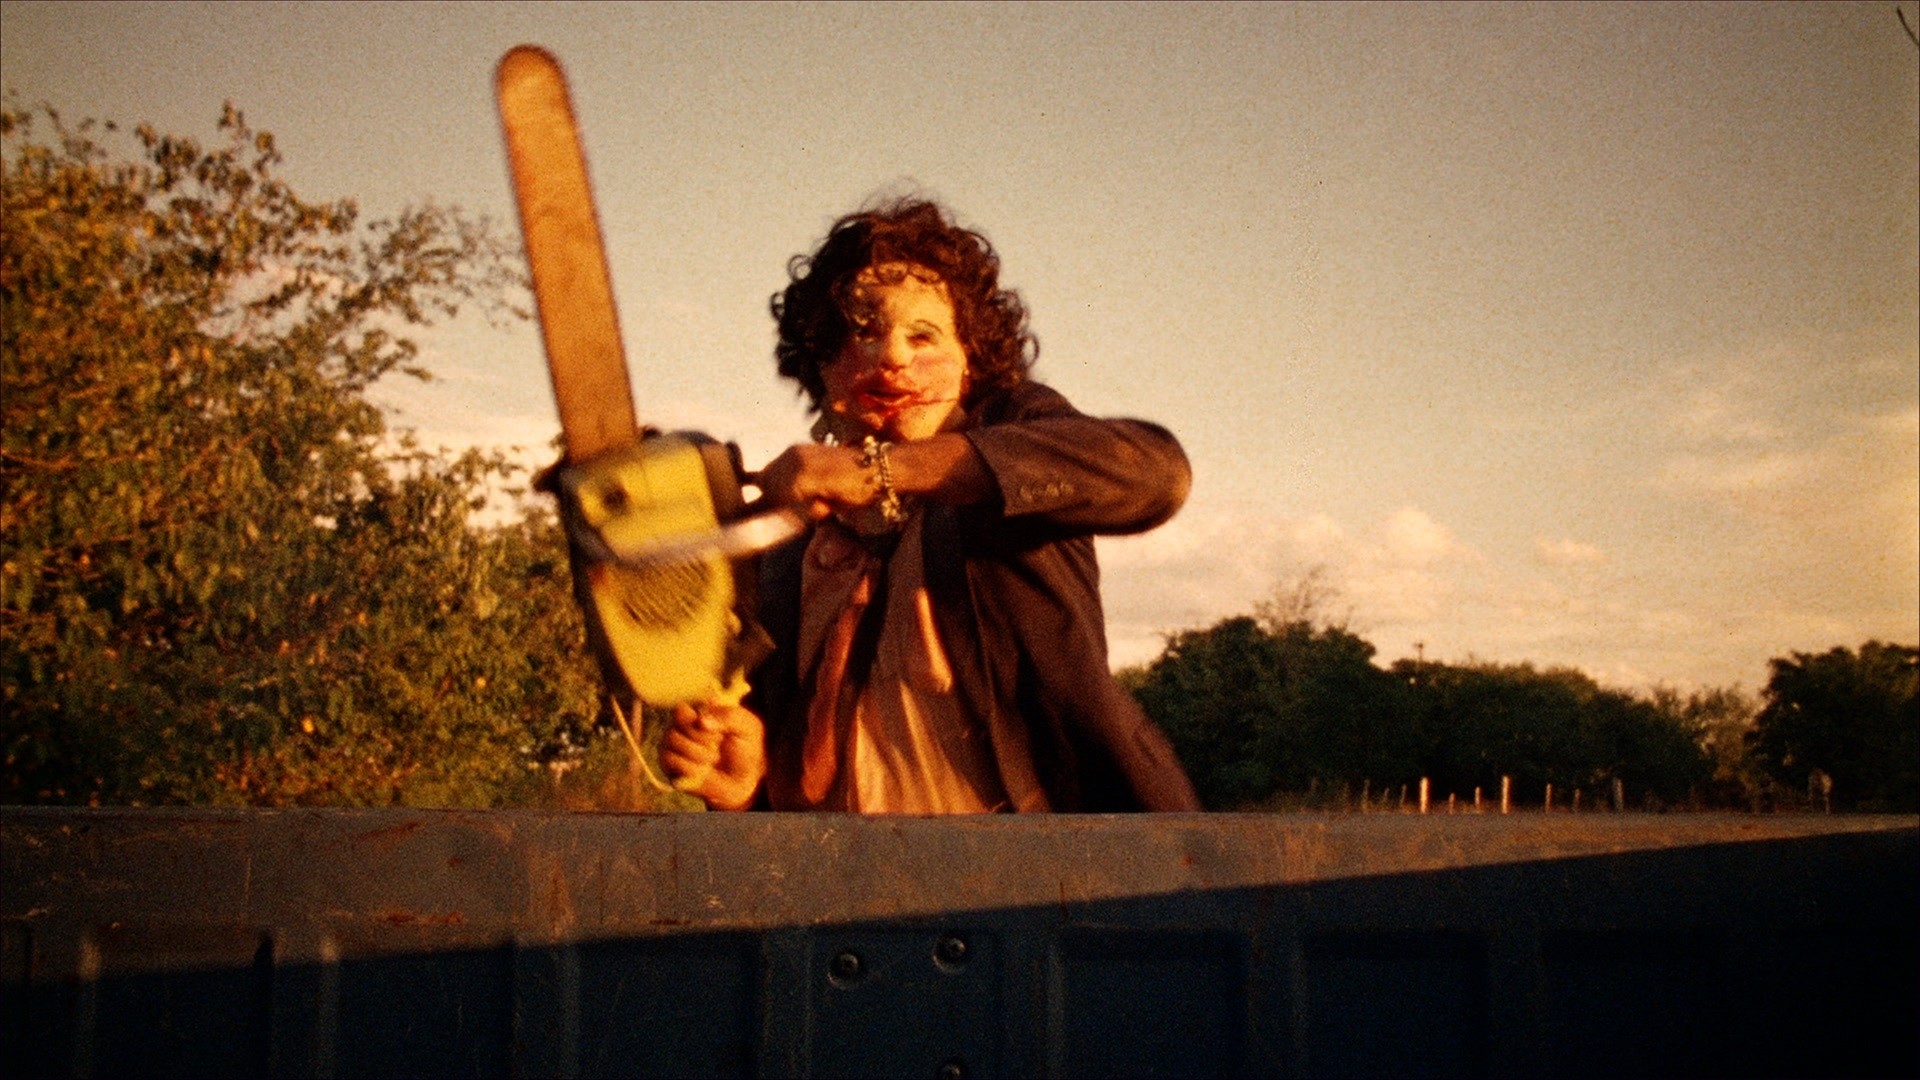 Leatherface Wallpaper, A wallpaper of Leatherface from 'The Texas Chain Saw  Massacre'.